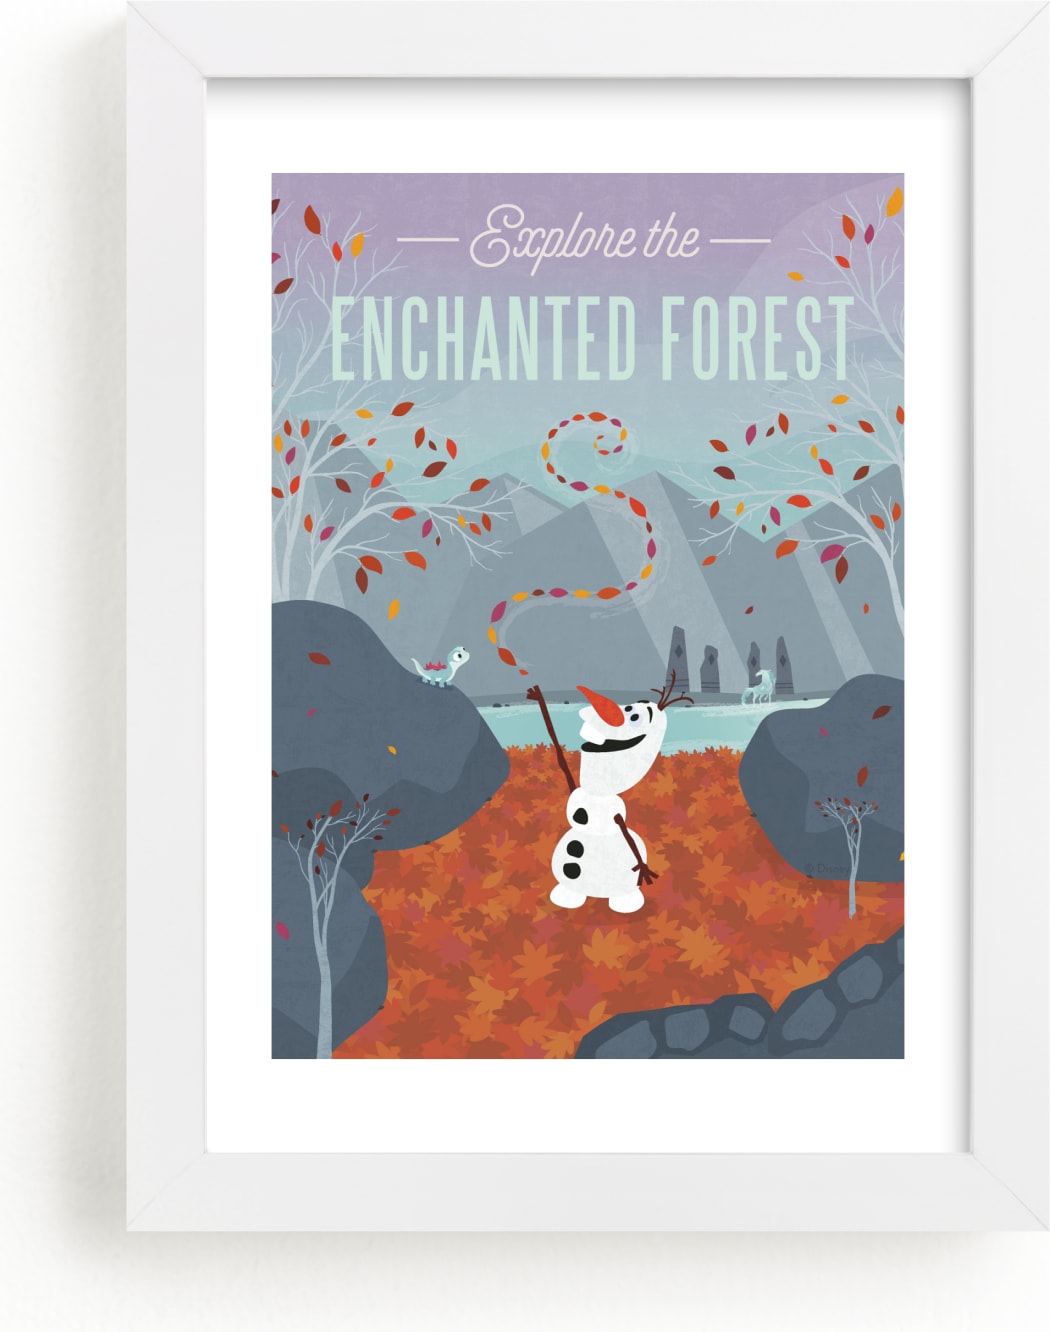 This is a blue disney art by Erica Krystek called Disney's Enchanted Forest.